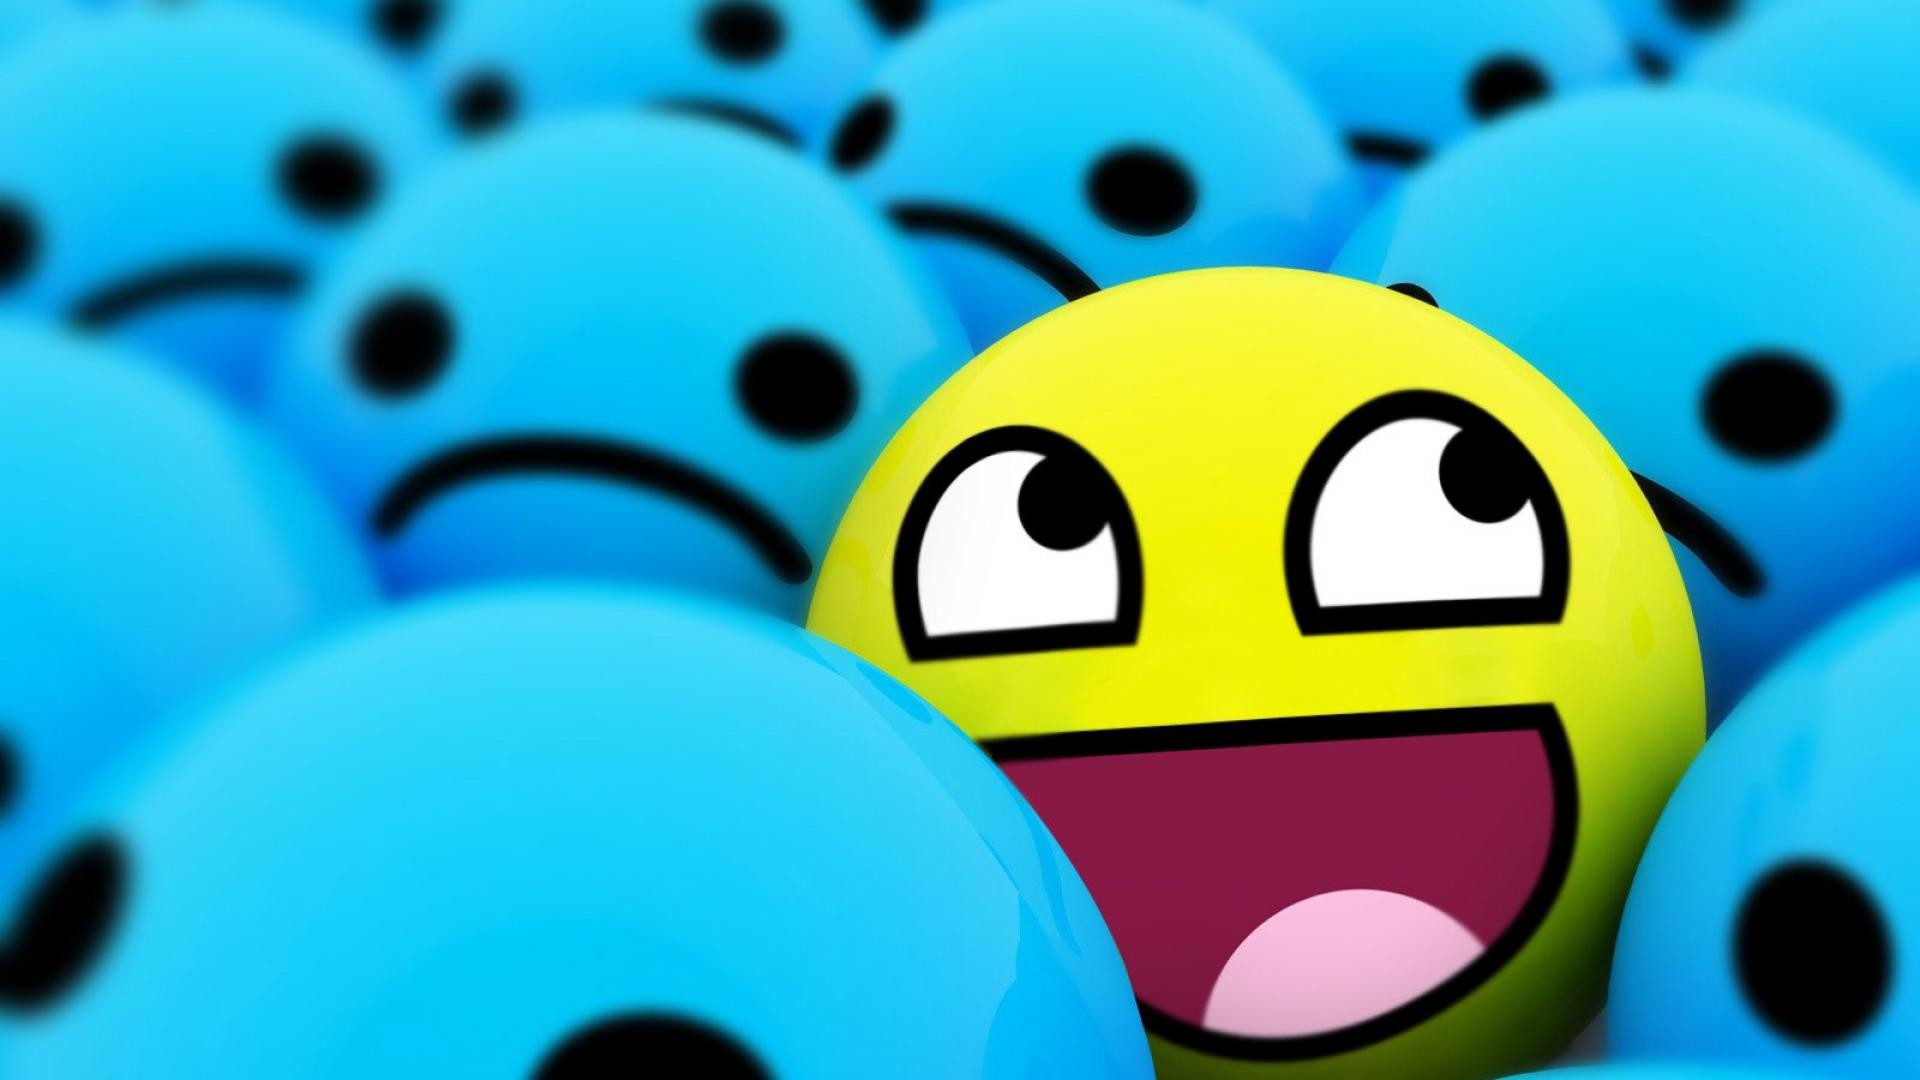 1920x1080 Images For Smiley Face Wallpaper 3d